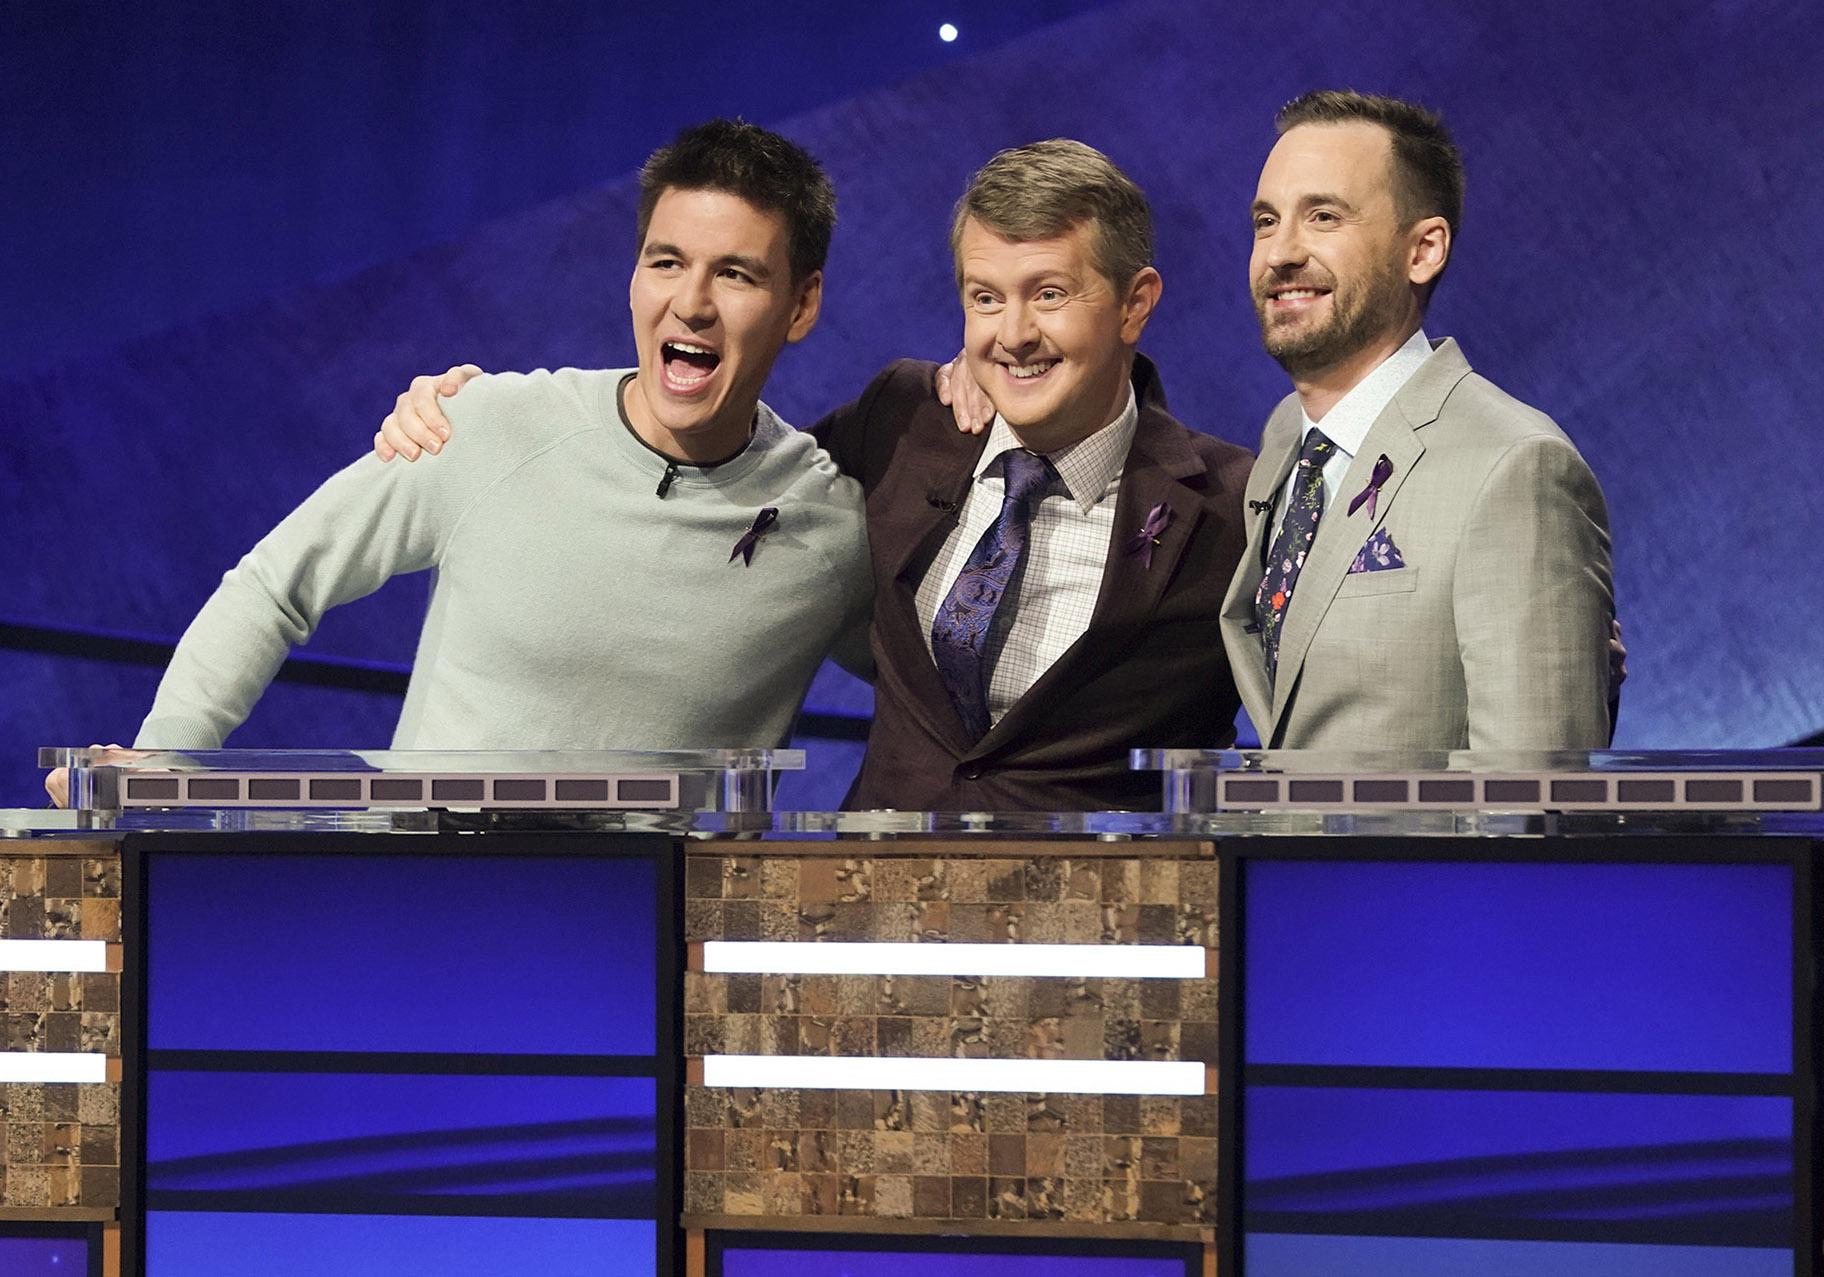 In this image released by ABC, contestants, from left, James Holzhauer, Ken Jennings and Brad Rutter appear on the set of “Jeopardy! The Greatest of All Time,” in Los Angeles. (Eric McCandless / ABC via AP)